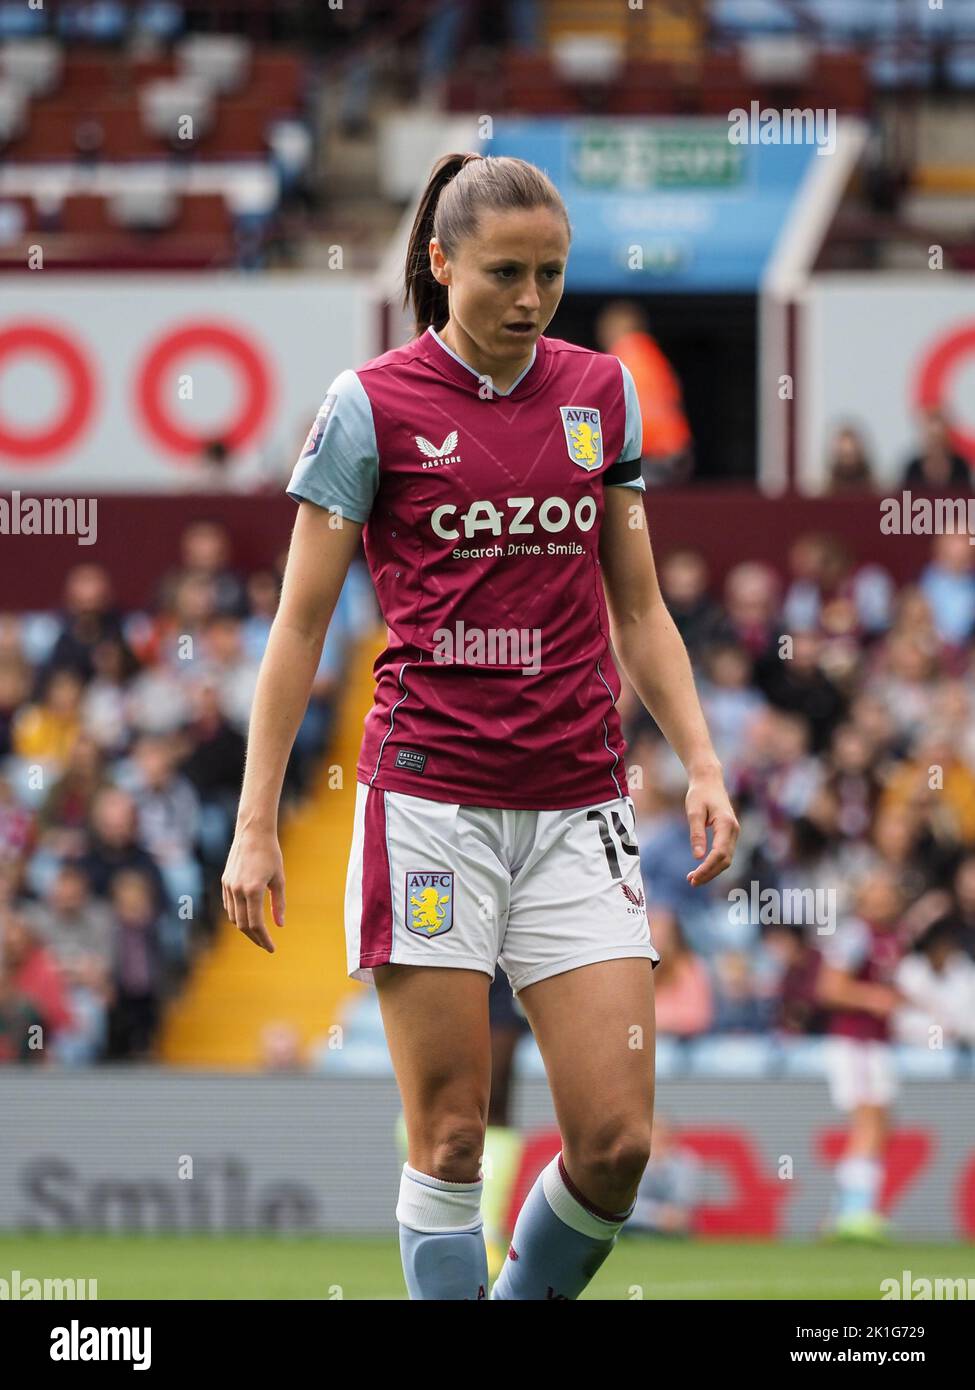 Birmingham, UK. 18th Sep, 2022. Birmingham, England, September 18th 2022: Danielle Turner (14 Aston Villa) in action during the Barclays FA Womens Super League game between Aston Villa and Manchester City at Villa Park in Birmingham, England (Natalie Mincher/SPP) Credit: SPP Sport Press Photo. /Alamy Live News Stock Photo